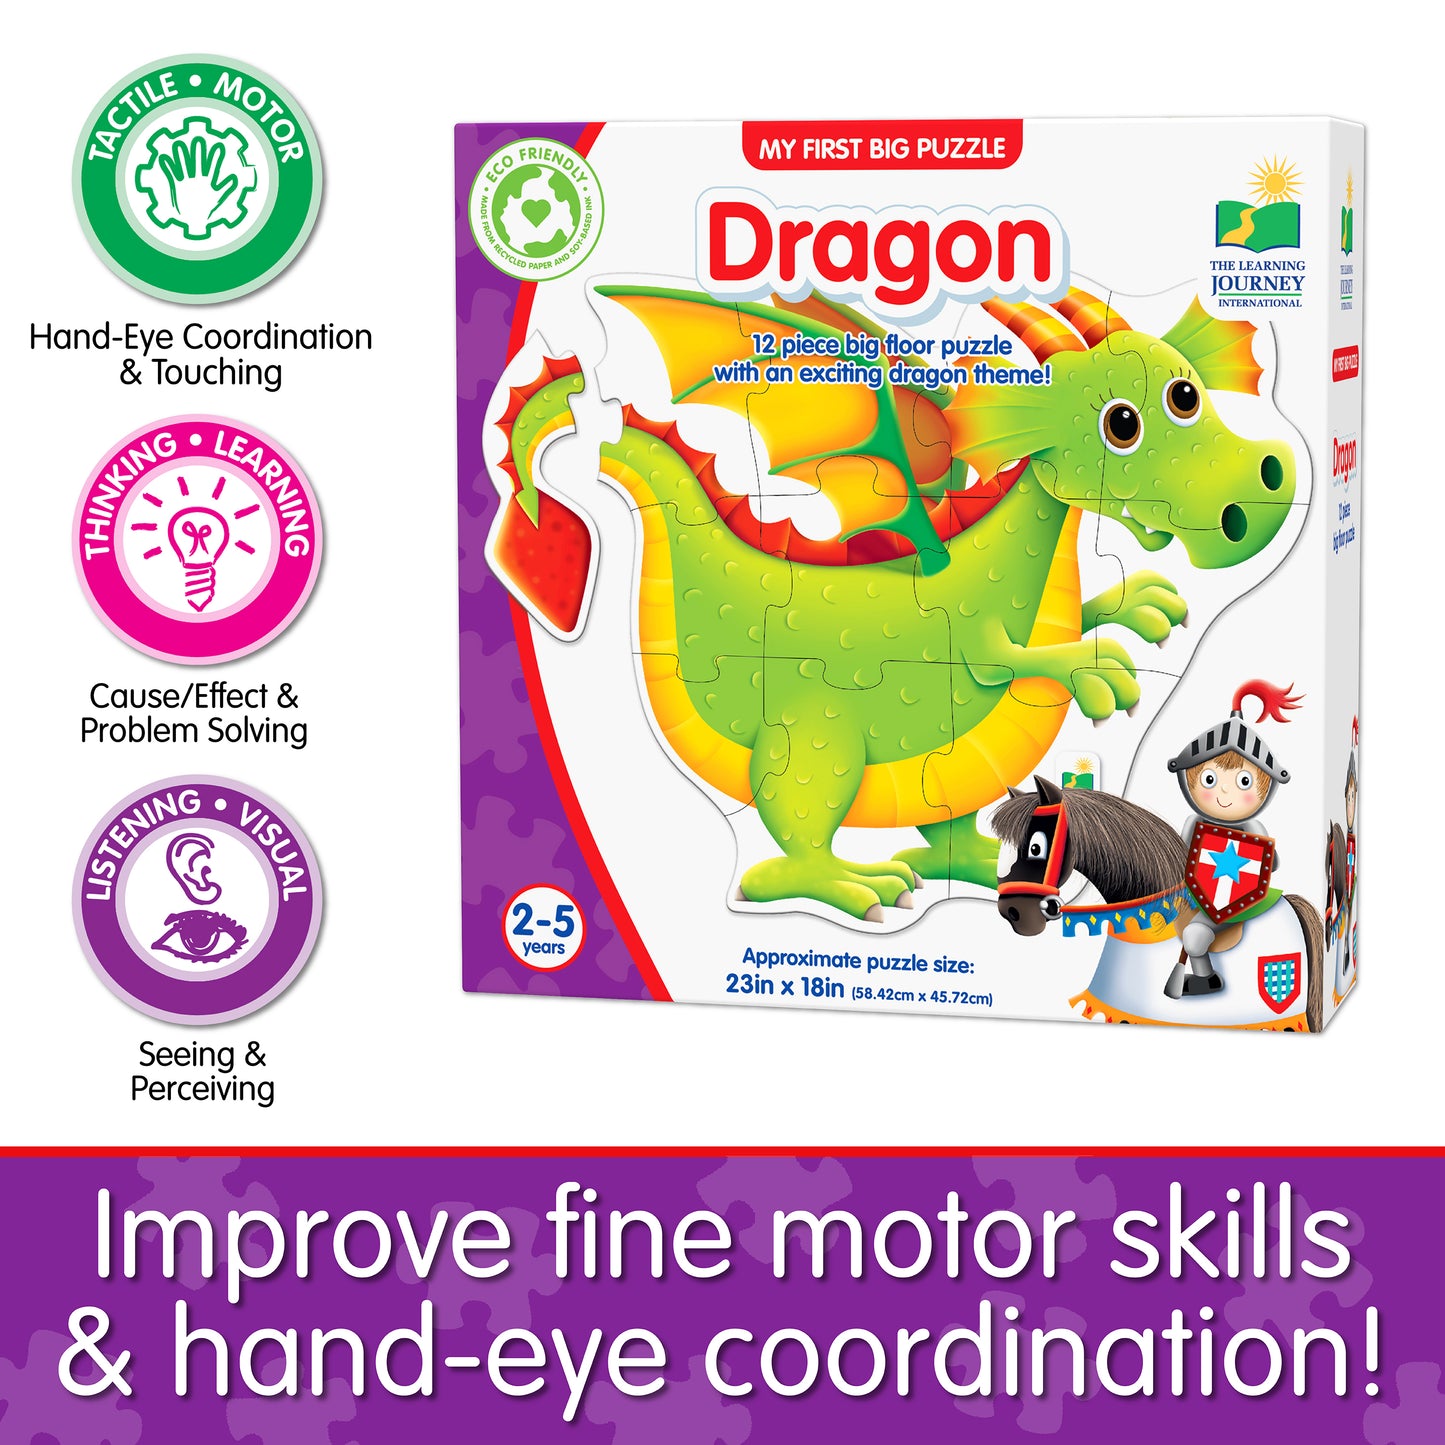 Infographic about My First Big Puzzle - Dragon's educational benefits that says, "Improve fine motor skills and hand-eye coordination!"